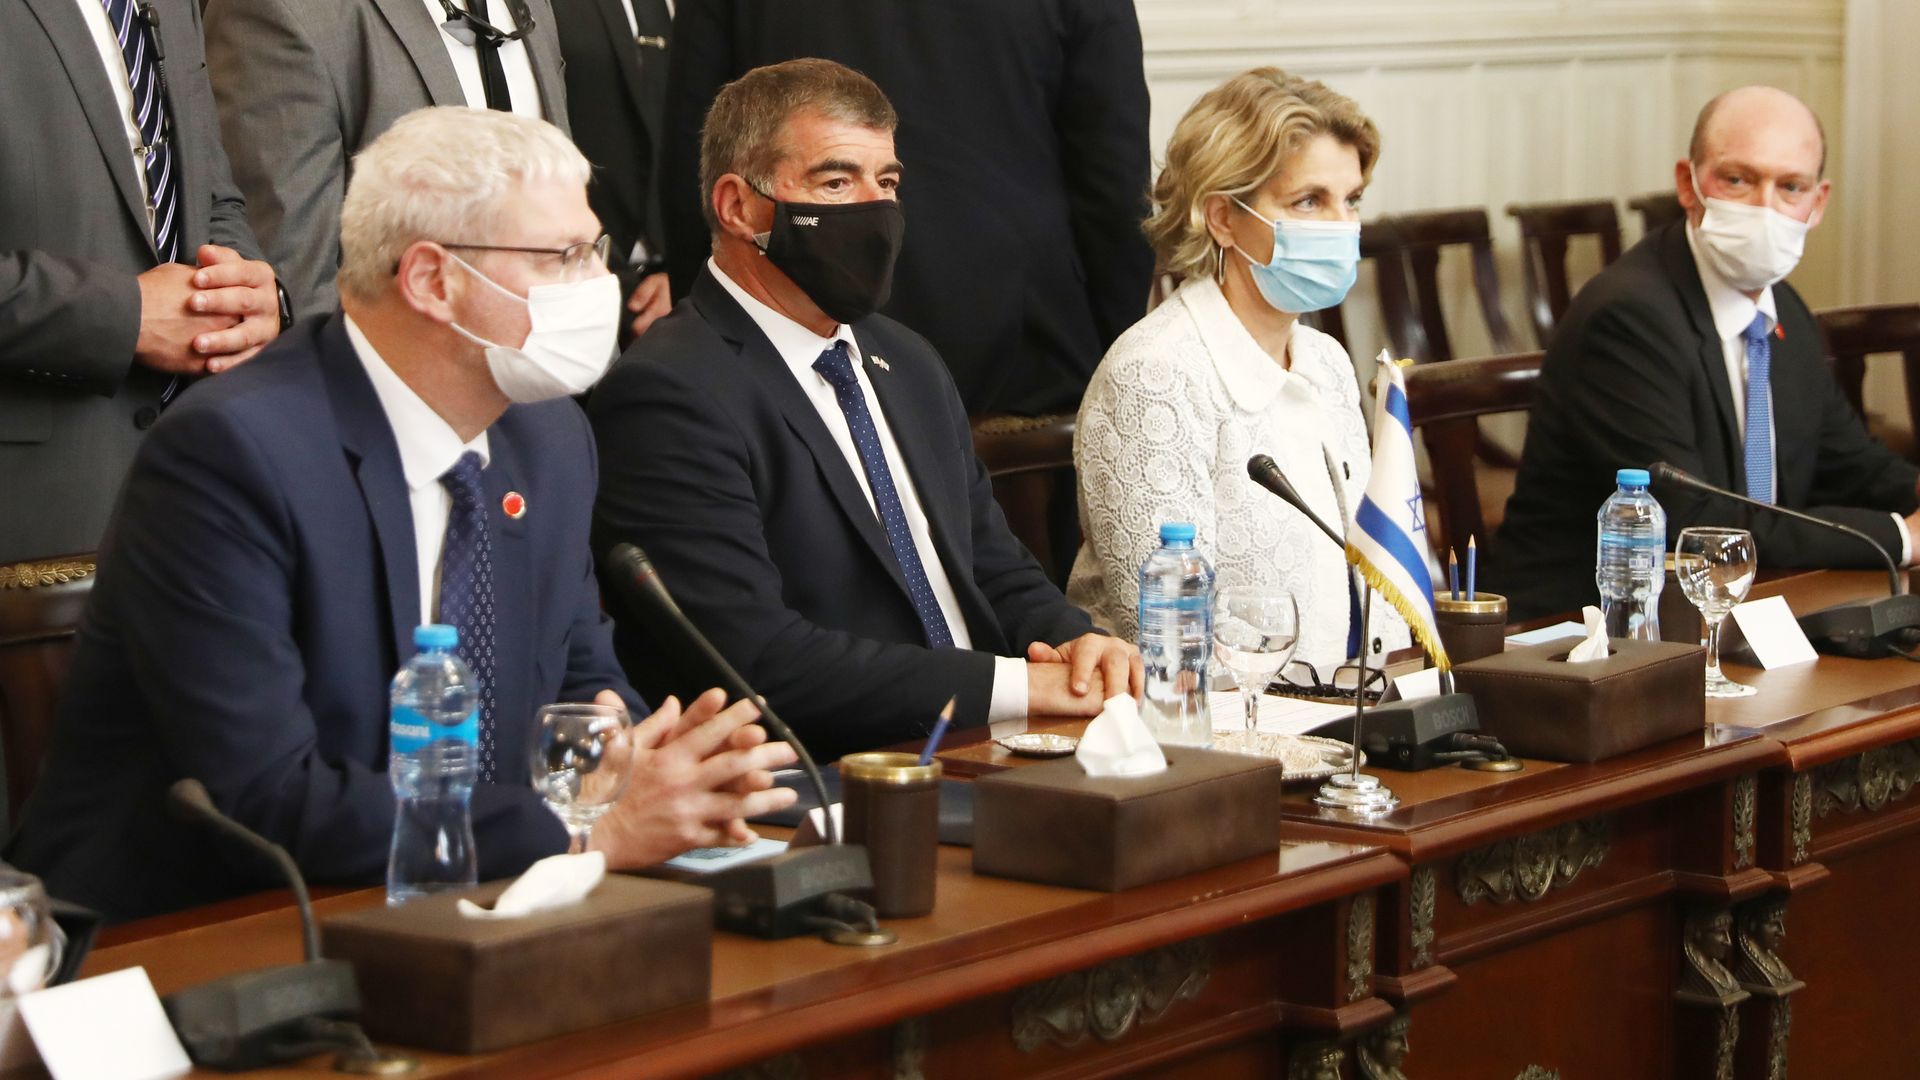 Two men and one woman sit at a table while wearing masks